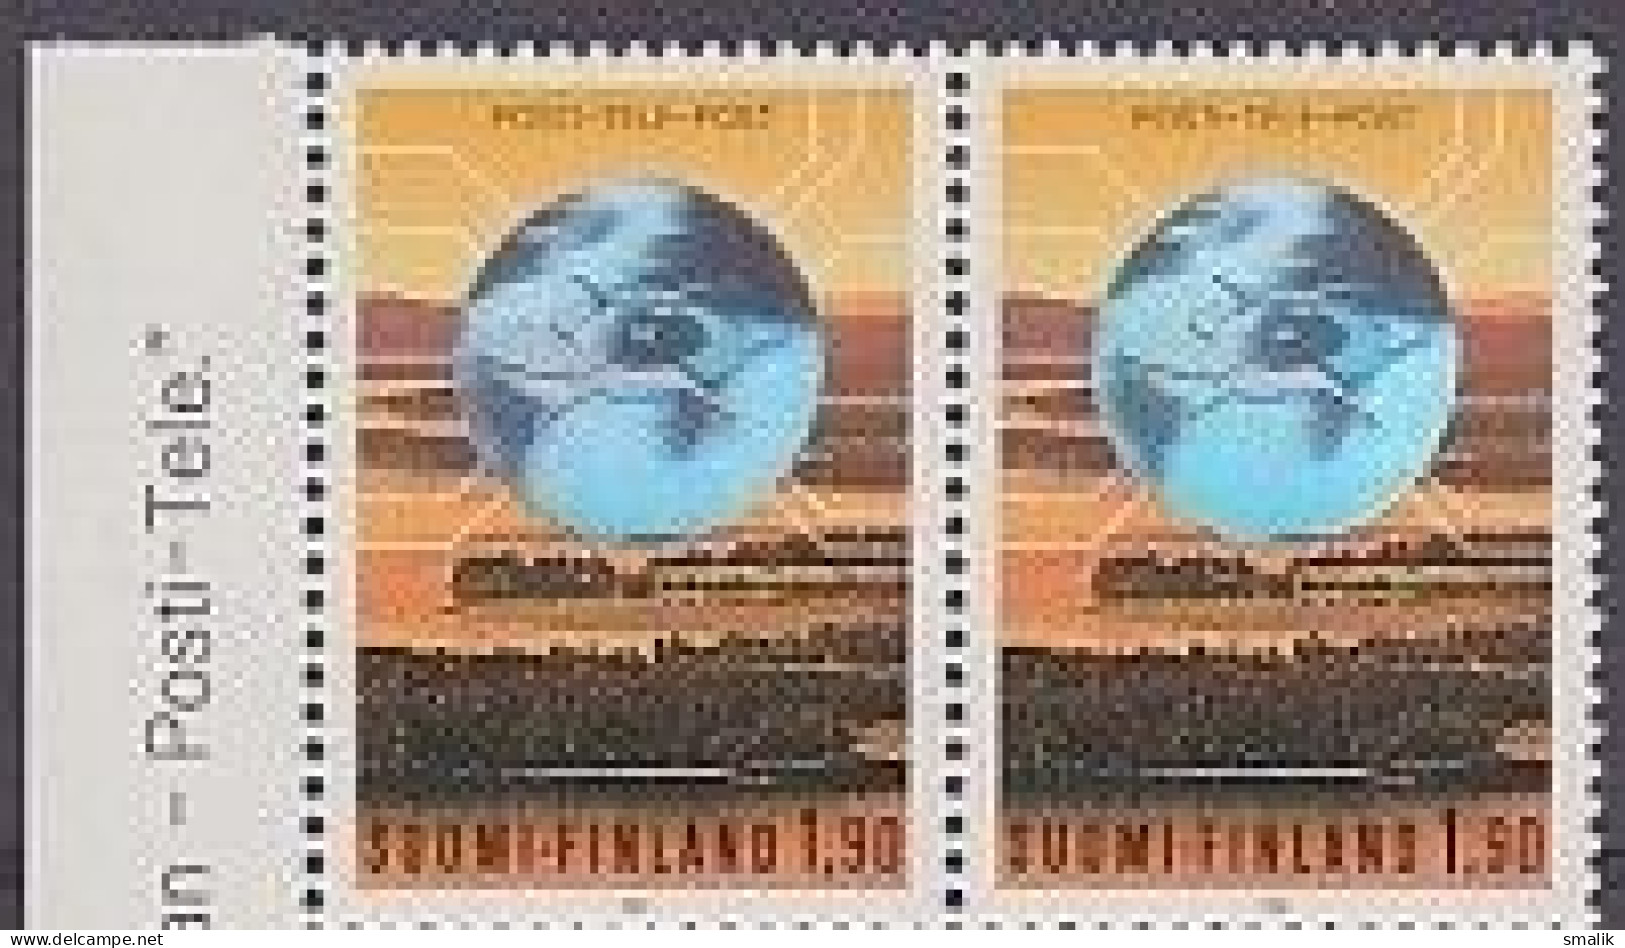 FINLAND 1990 - The Privatization Of The Finnish Post, Unusual Hologram Stamp PAIR MNH - Holograms